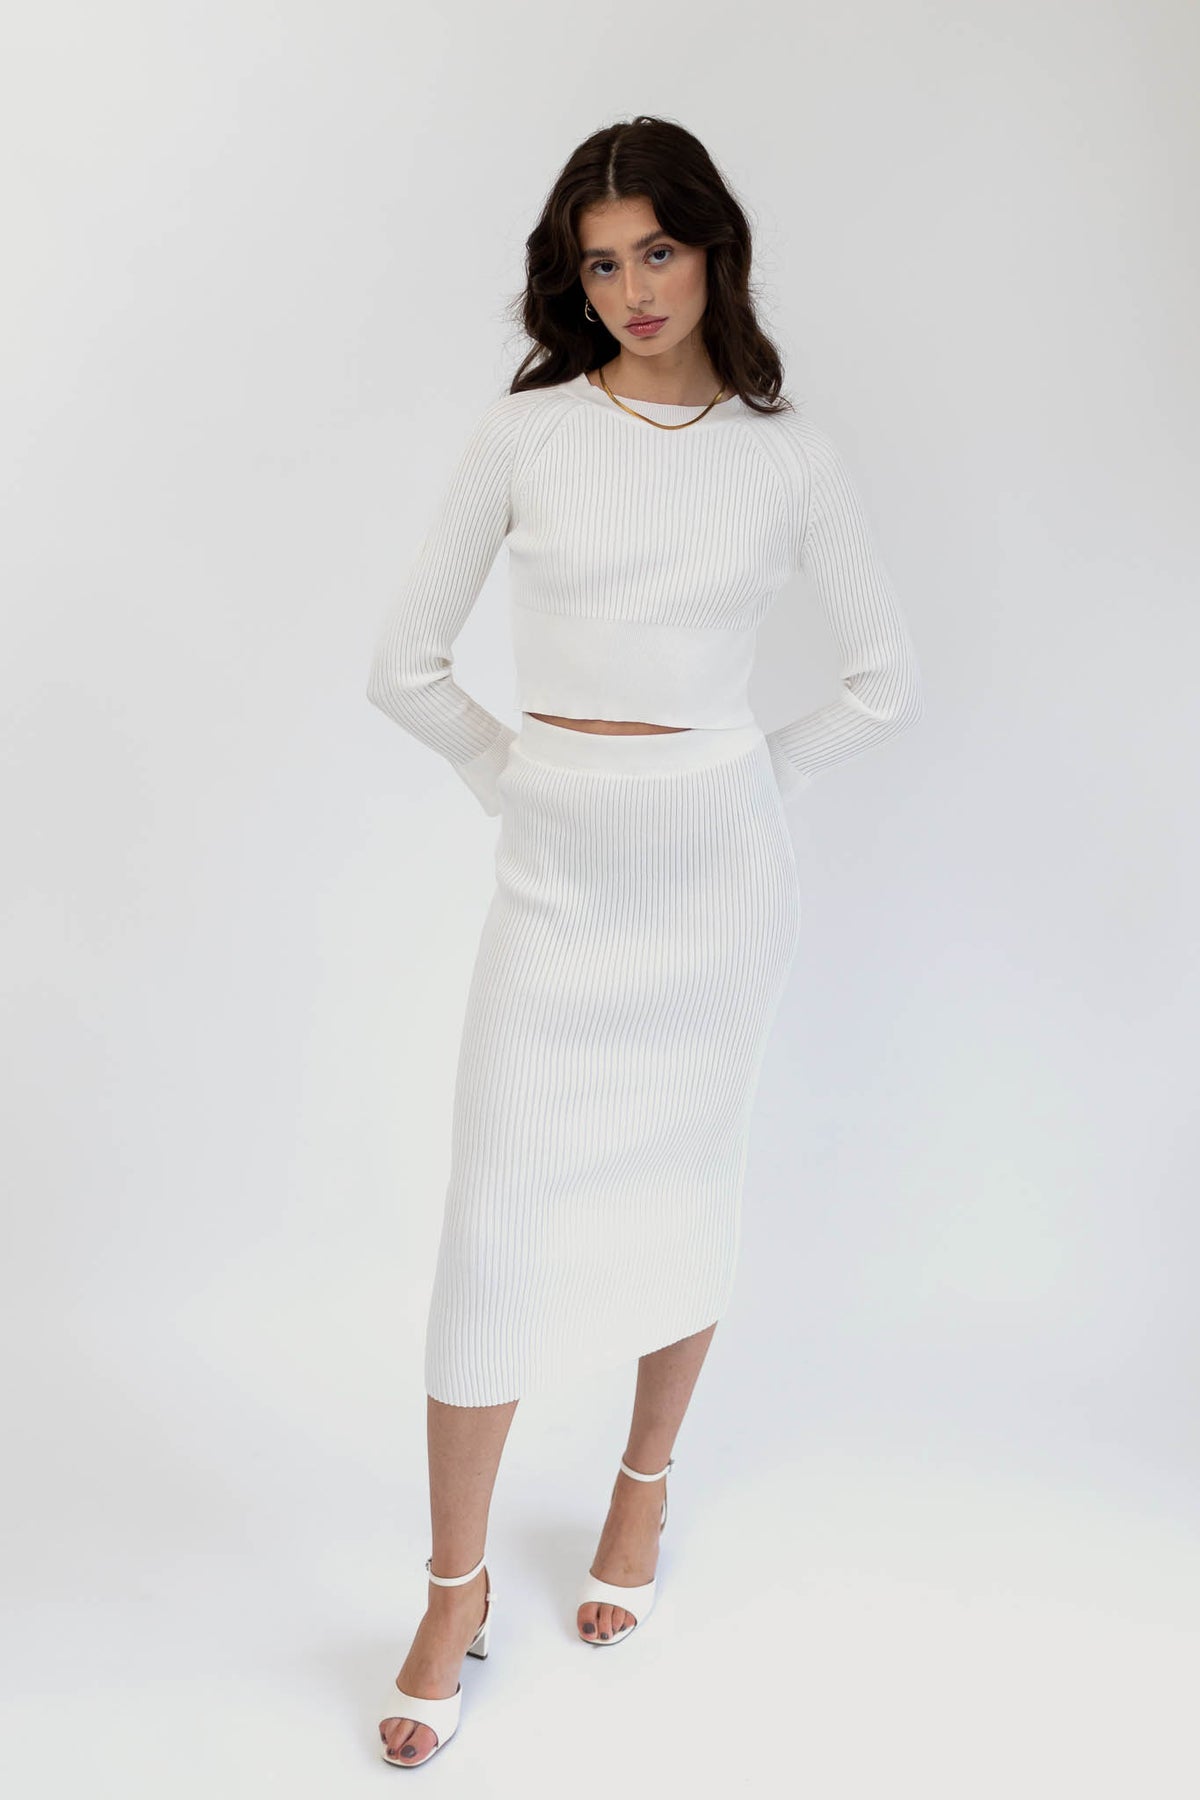 Matching Ribbed Sweater and Skirt Set